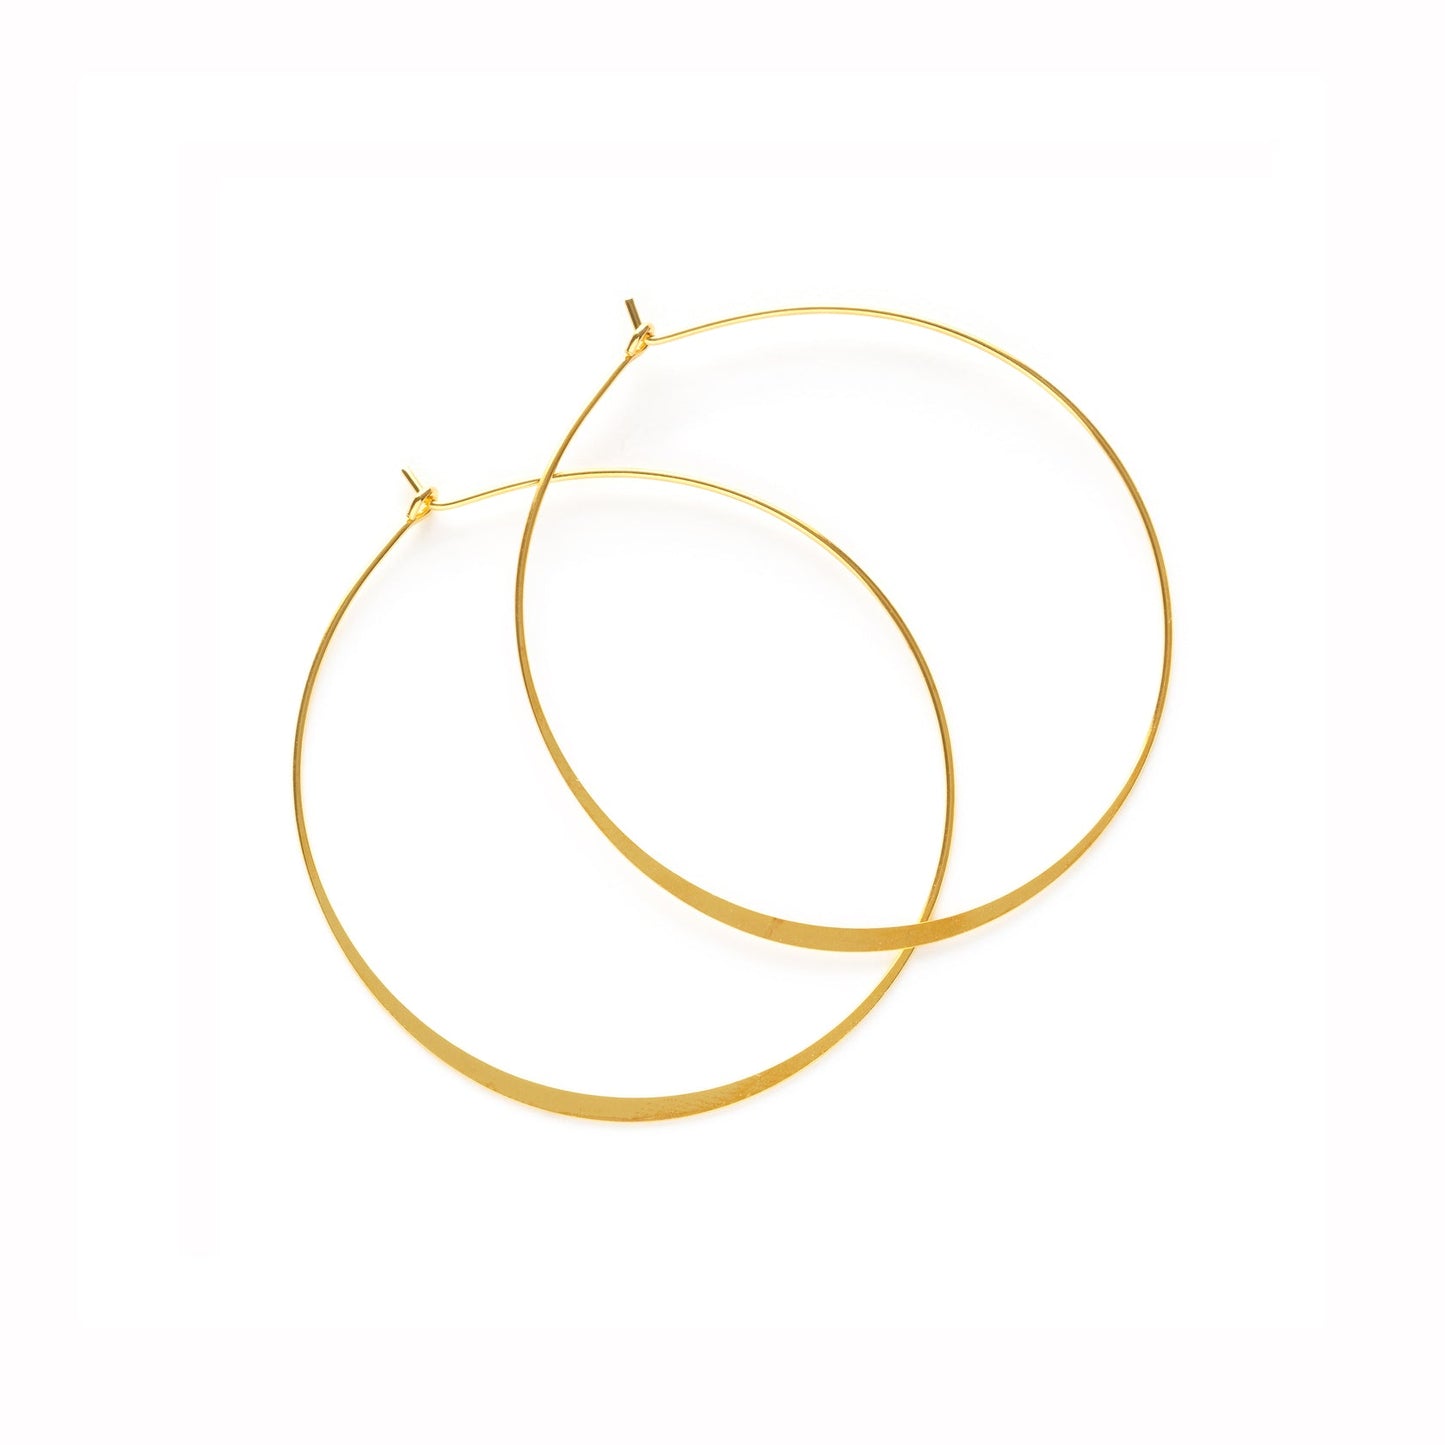 1.5" Classic Hoops - Gold